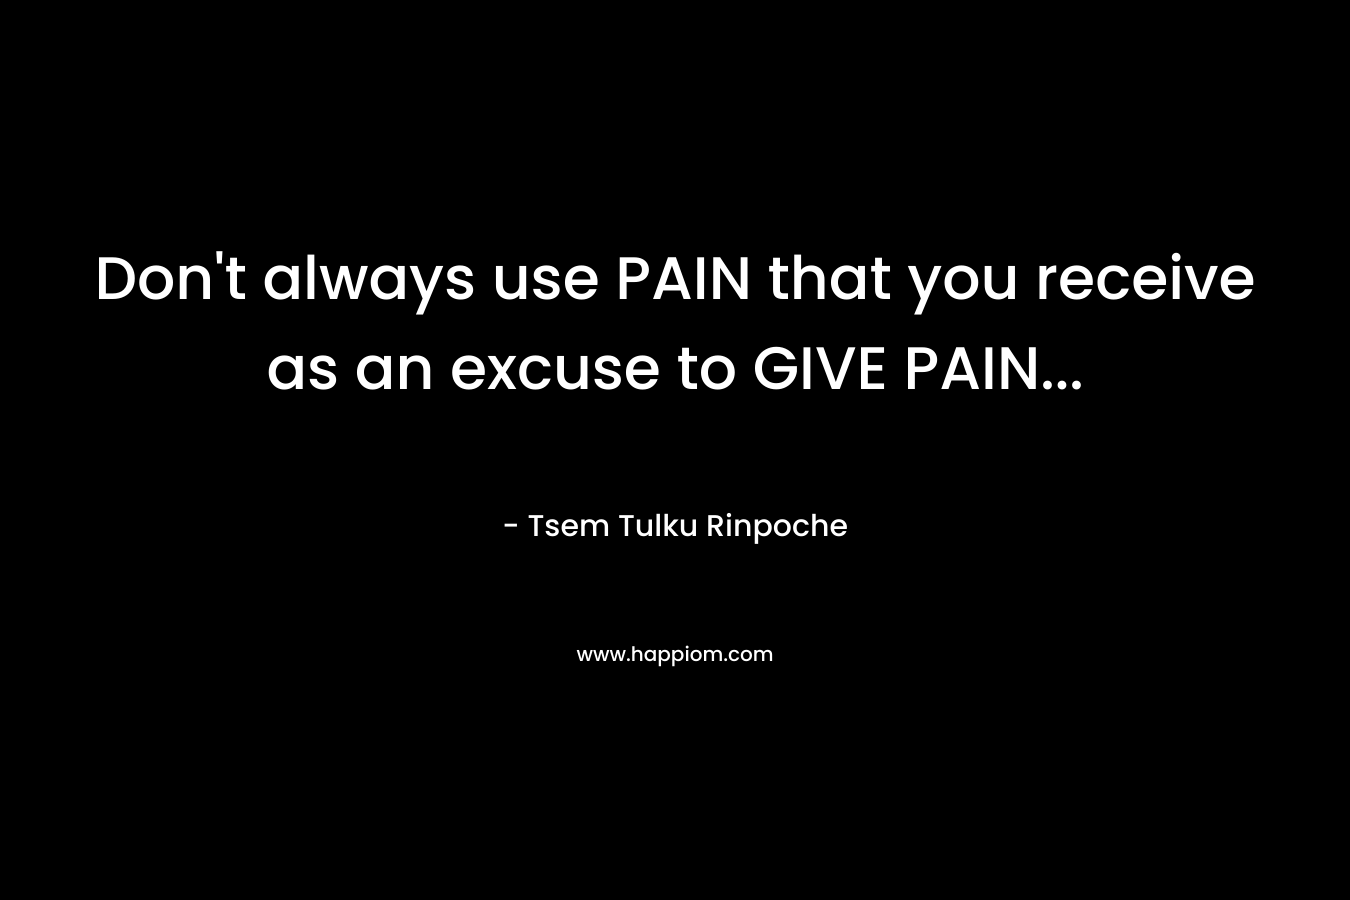 Don’t always use PAIN that you receive as an excuse to GIVE PAIN… – Tsem Tulku Rinpoche